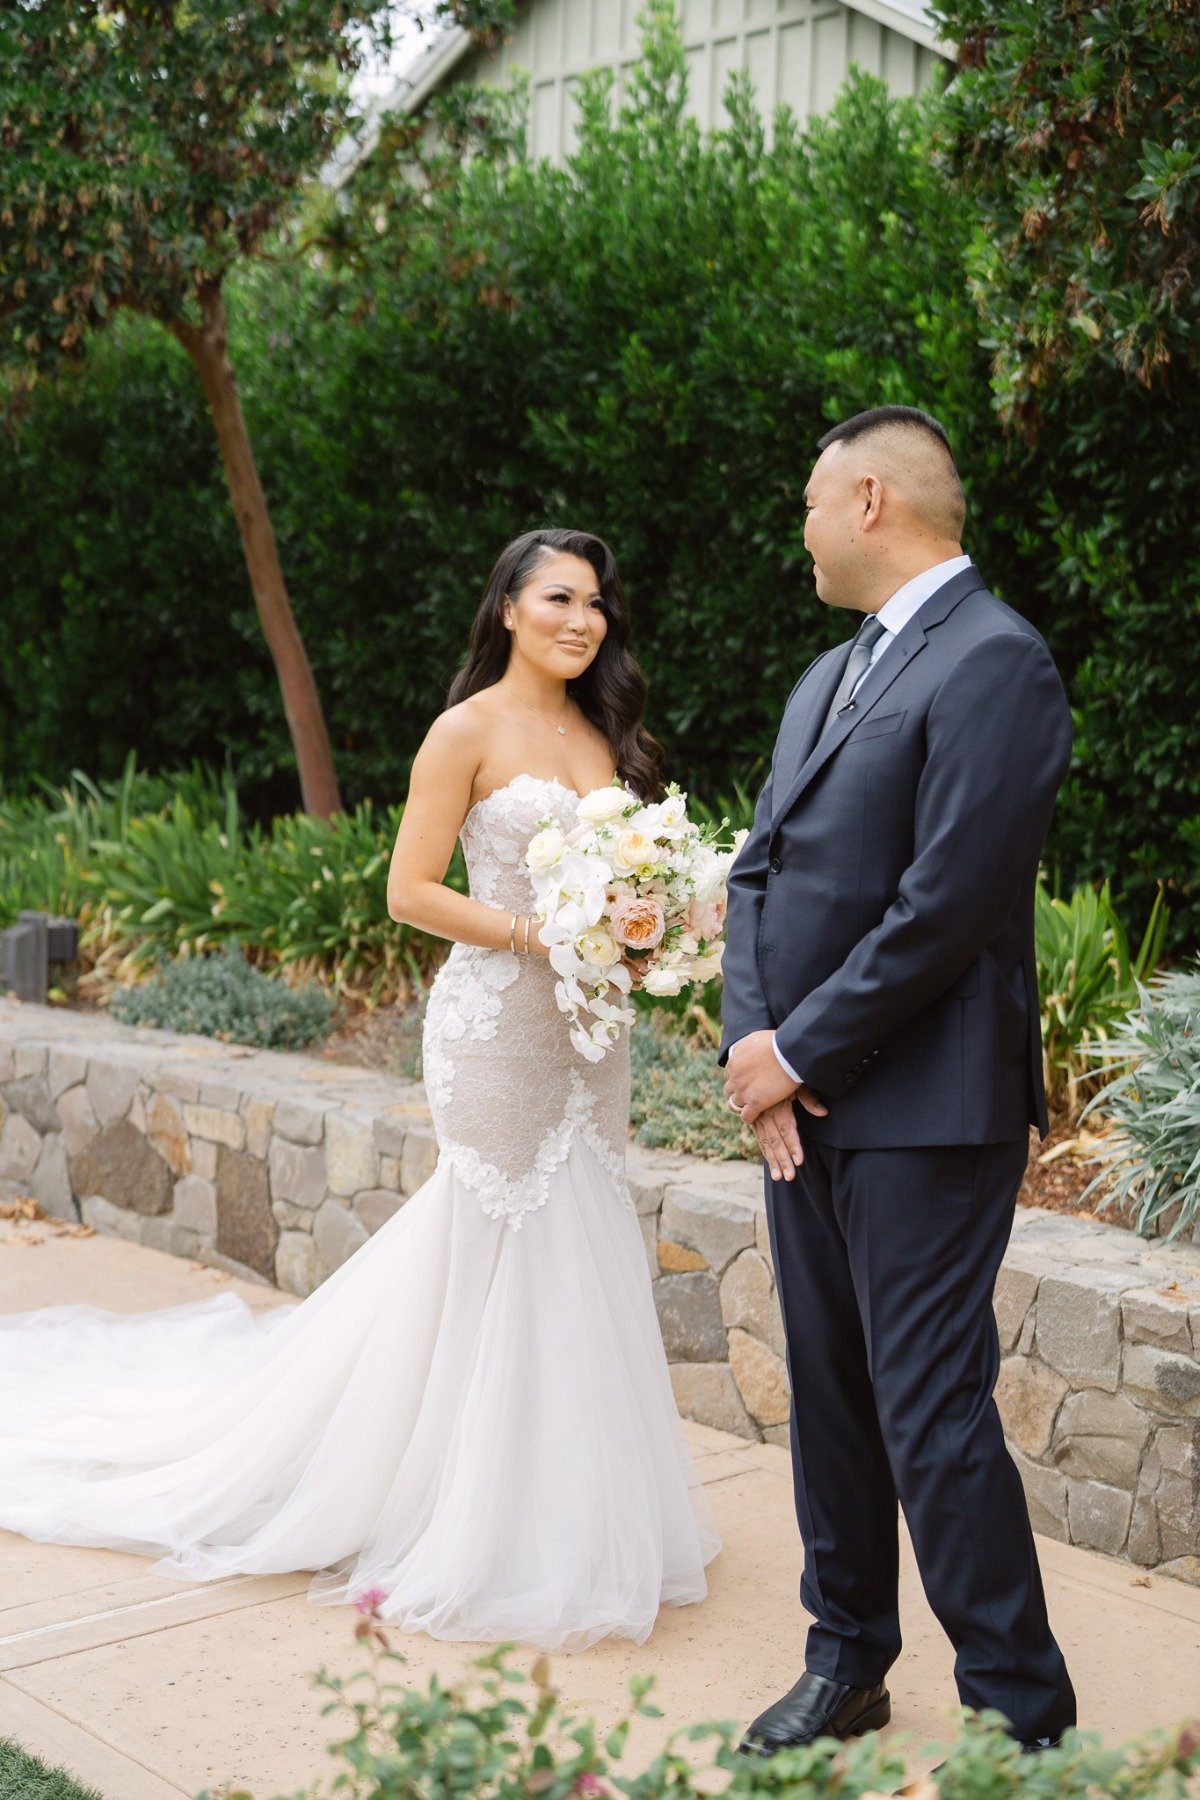 This intimate luxury Napa wedding was an affair not to miss!